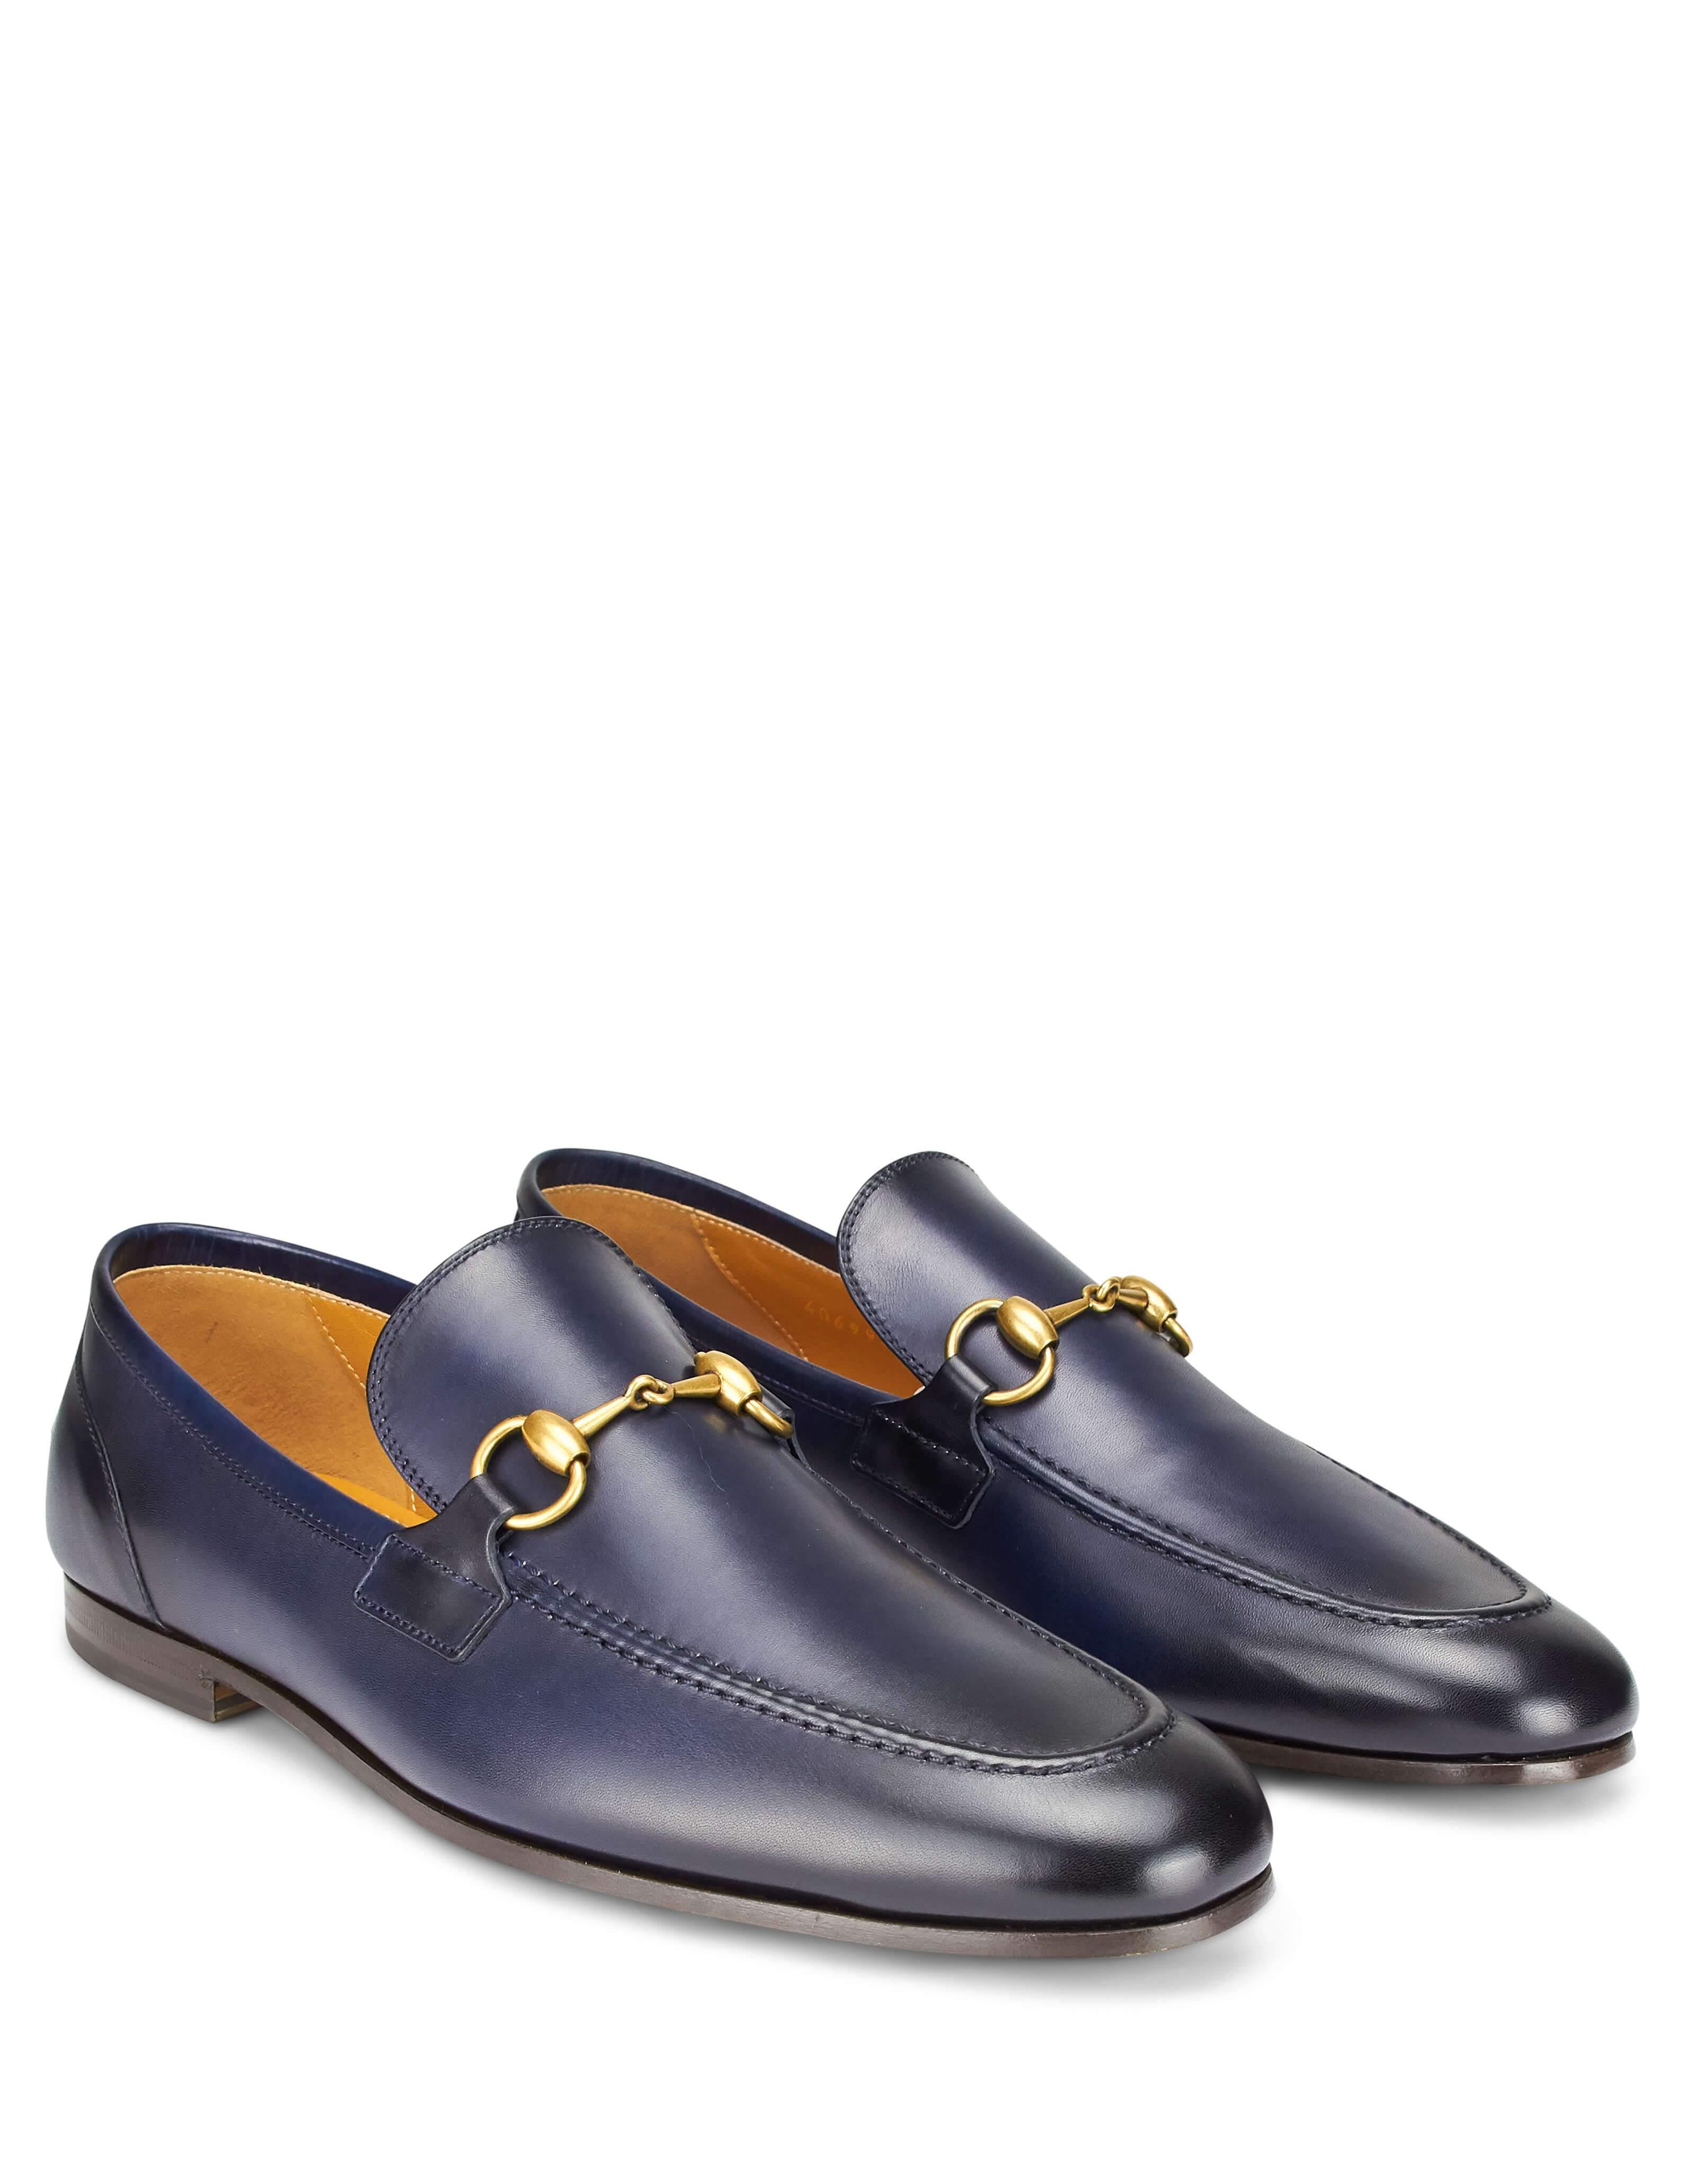 Gucci Jordaan Leather Loafer in Navy (Blue) for Men - Save 32% - Lyst